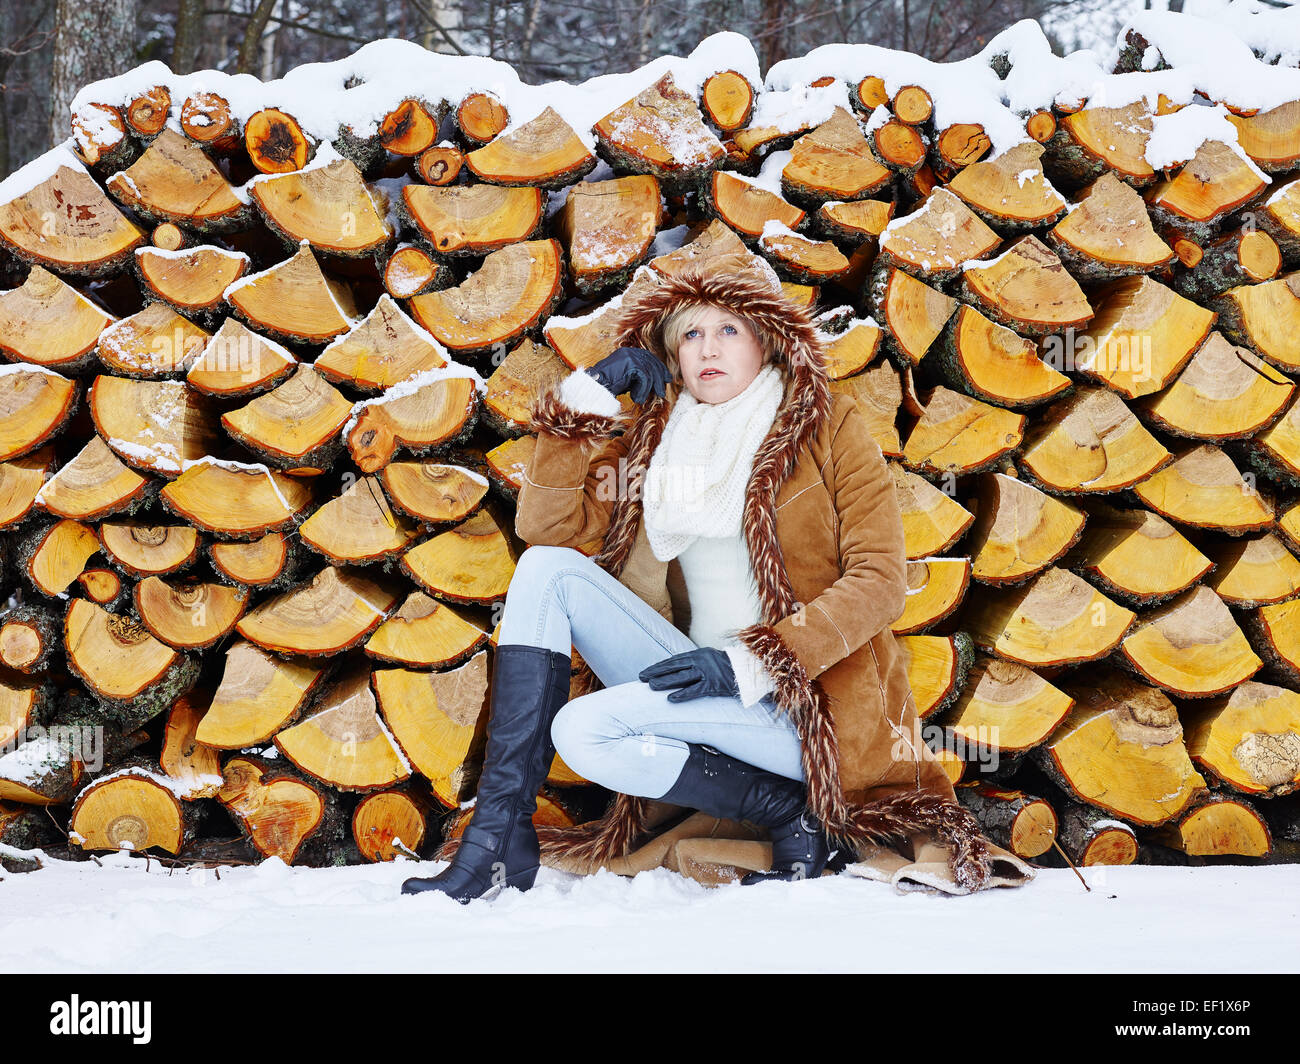 Fashionable mature adult woman wearing winter clothes, rural scene, firewood stack on background Stock Photo